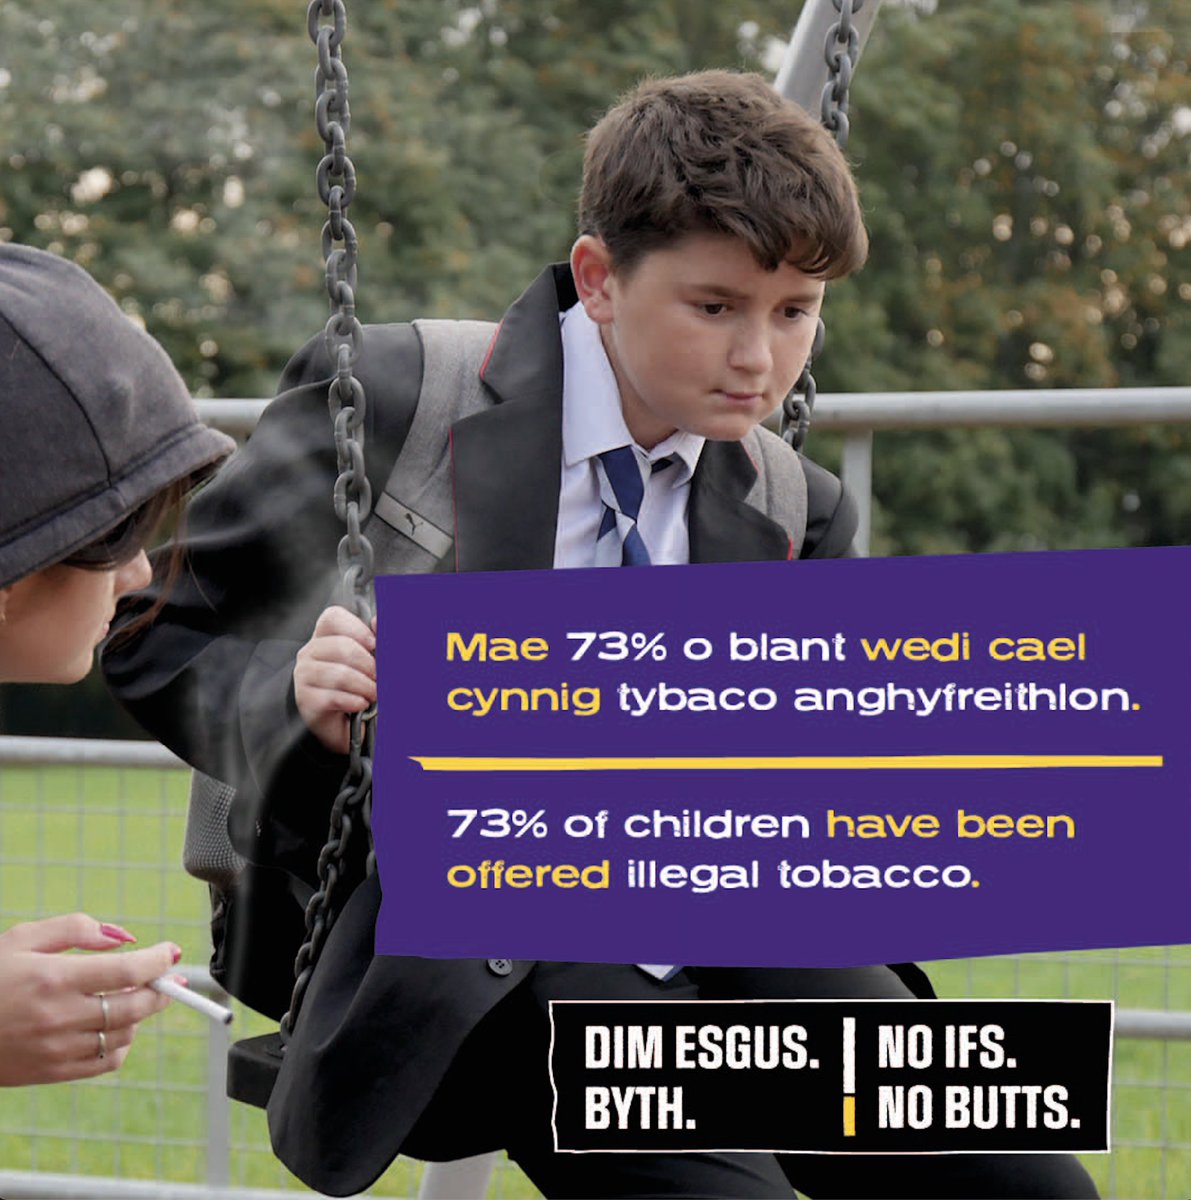 Sellers of cheap cigarettes could be offering them to your children. In shops, online, or even at a relative's house. 

If you suspect this has happened, or would like more information, visit here: noifs-nobutts.co.uk

#illegaltobacco #illegalcigarettes #noifsnobuttswales